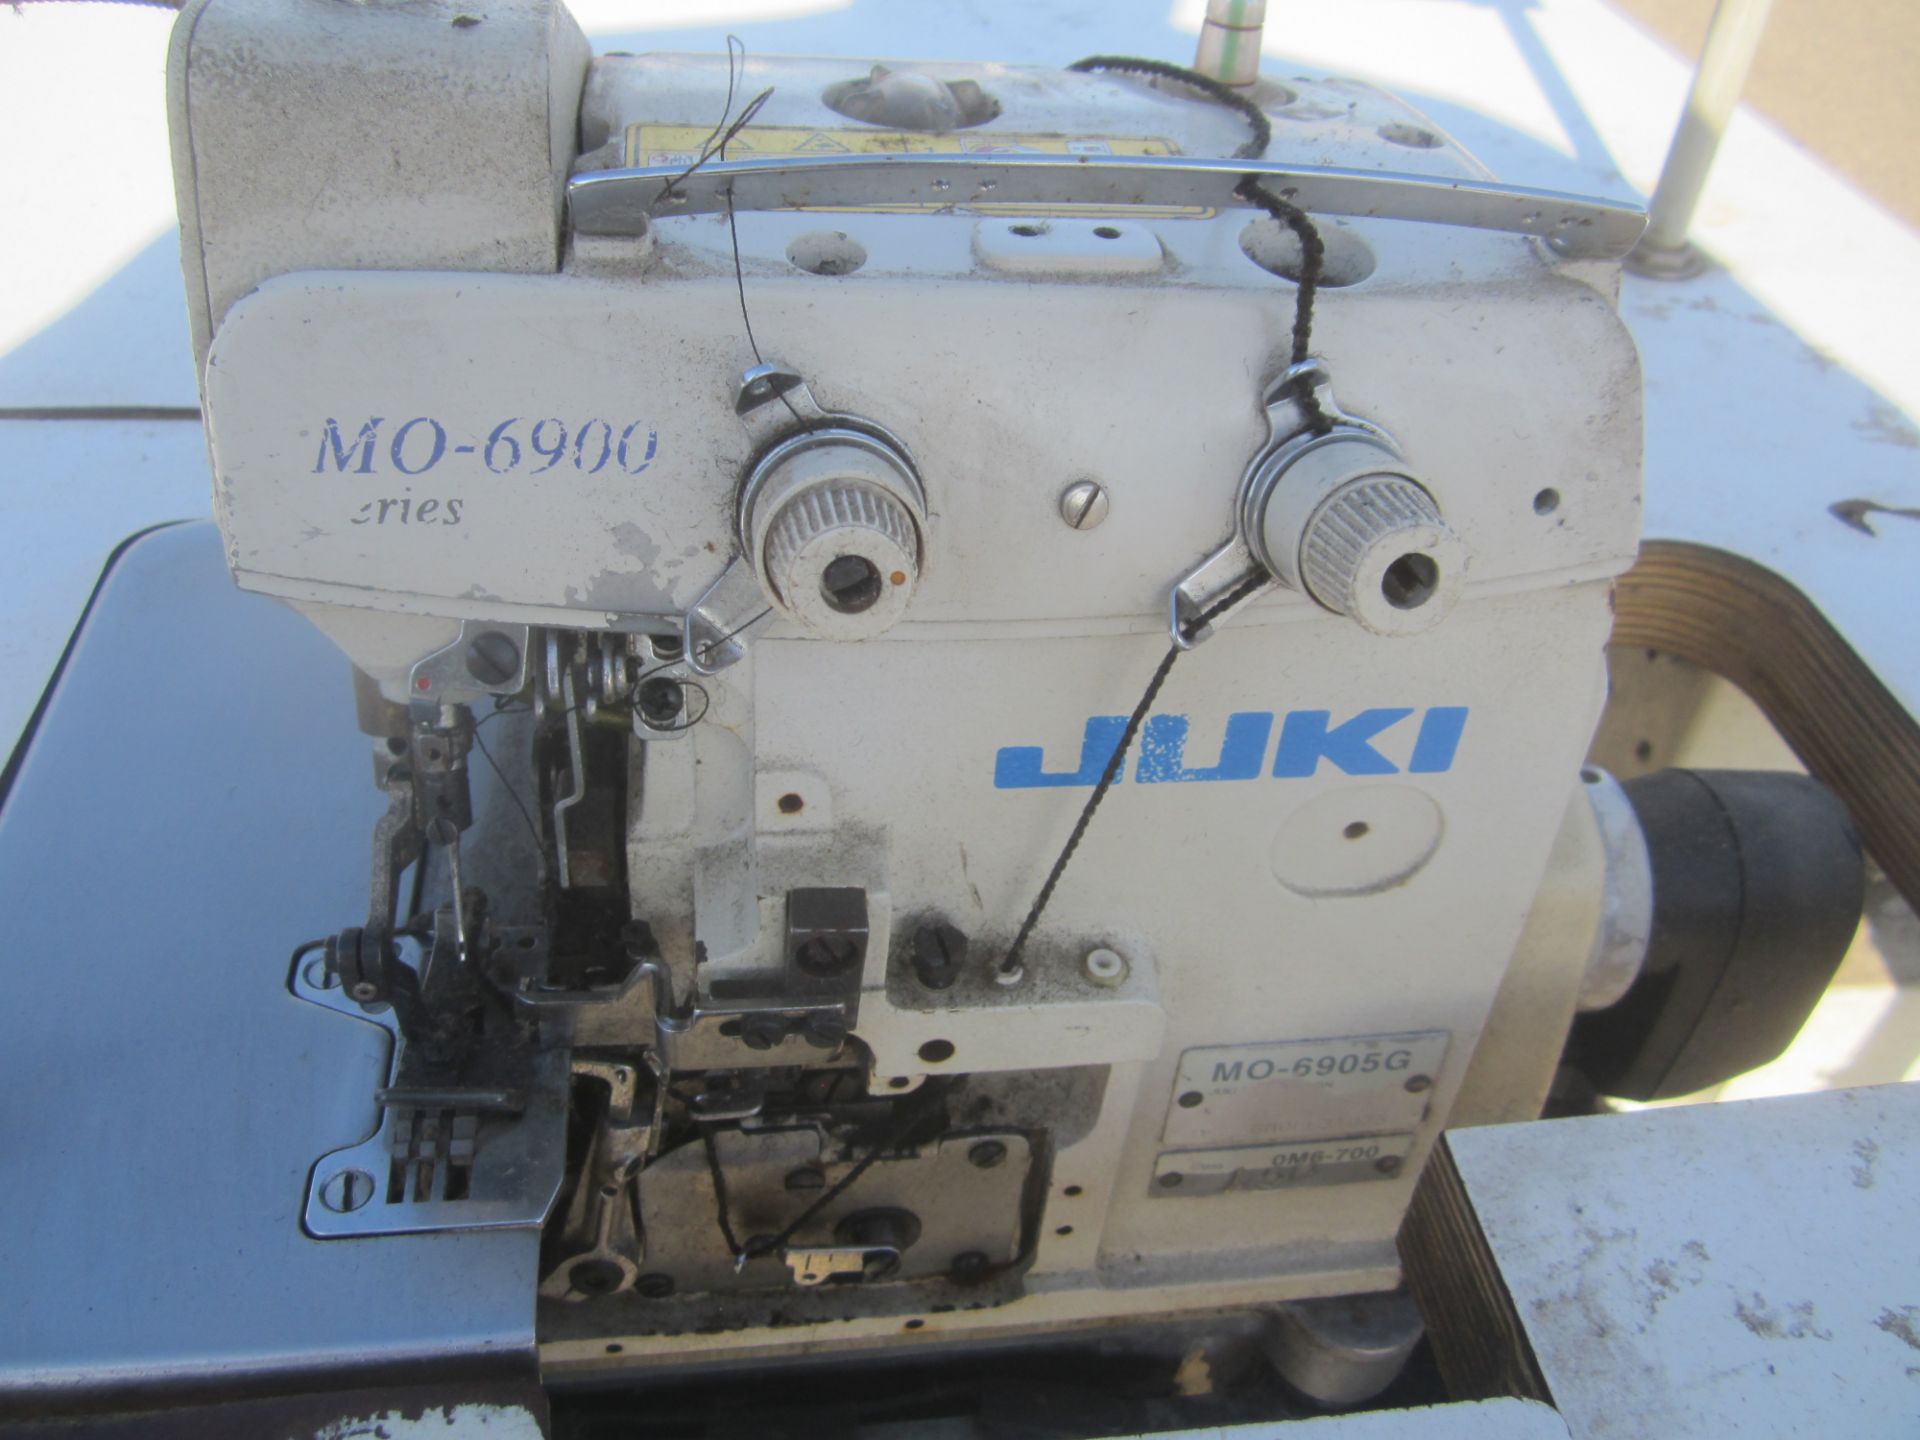 Juki Model MO-6905G Class OM6-700 Industrial Sewing Machine, s/n 8MOEG31025, with Elka Electronic - Image 2 of 5